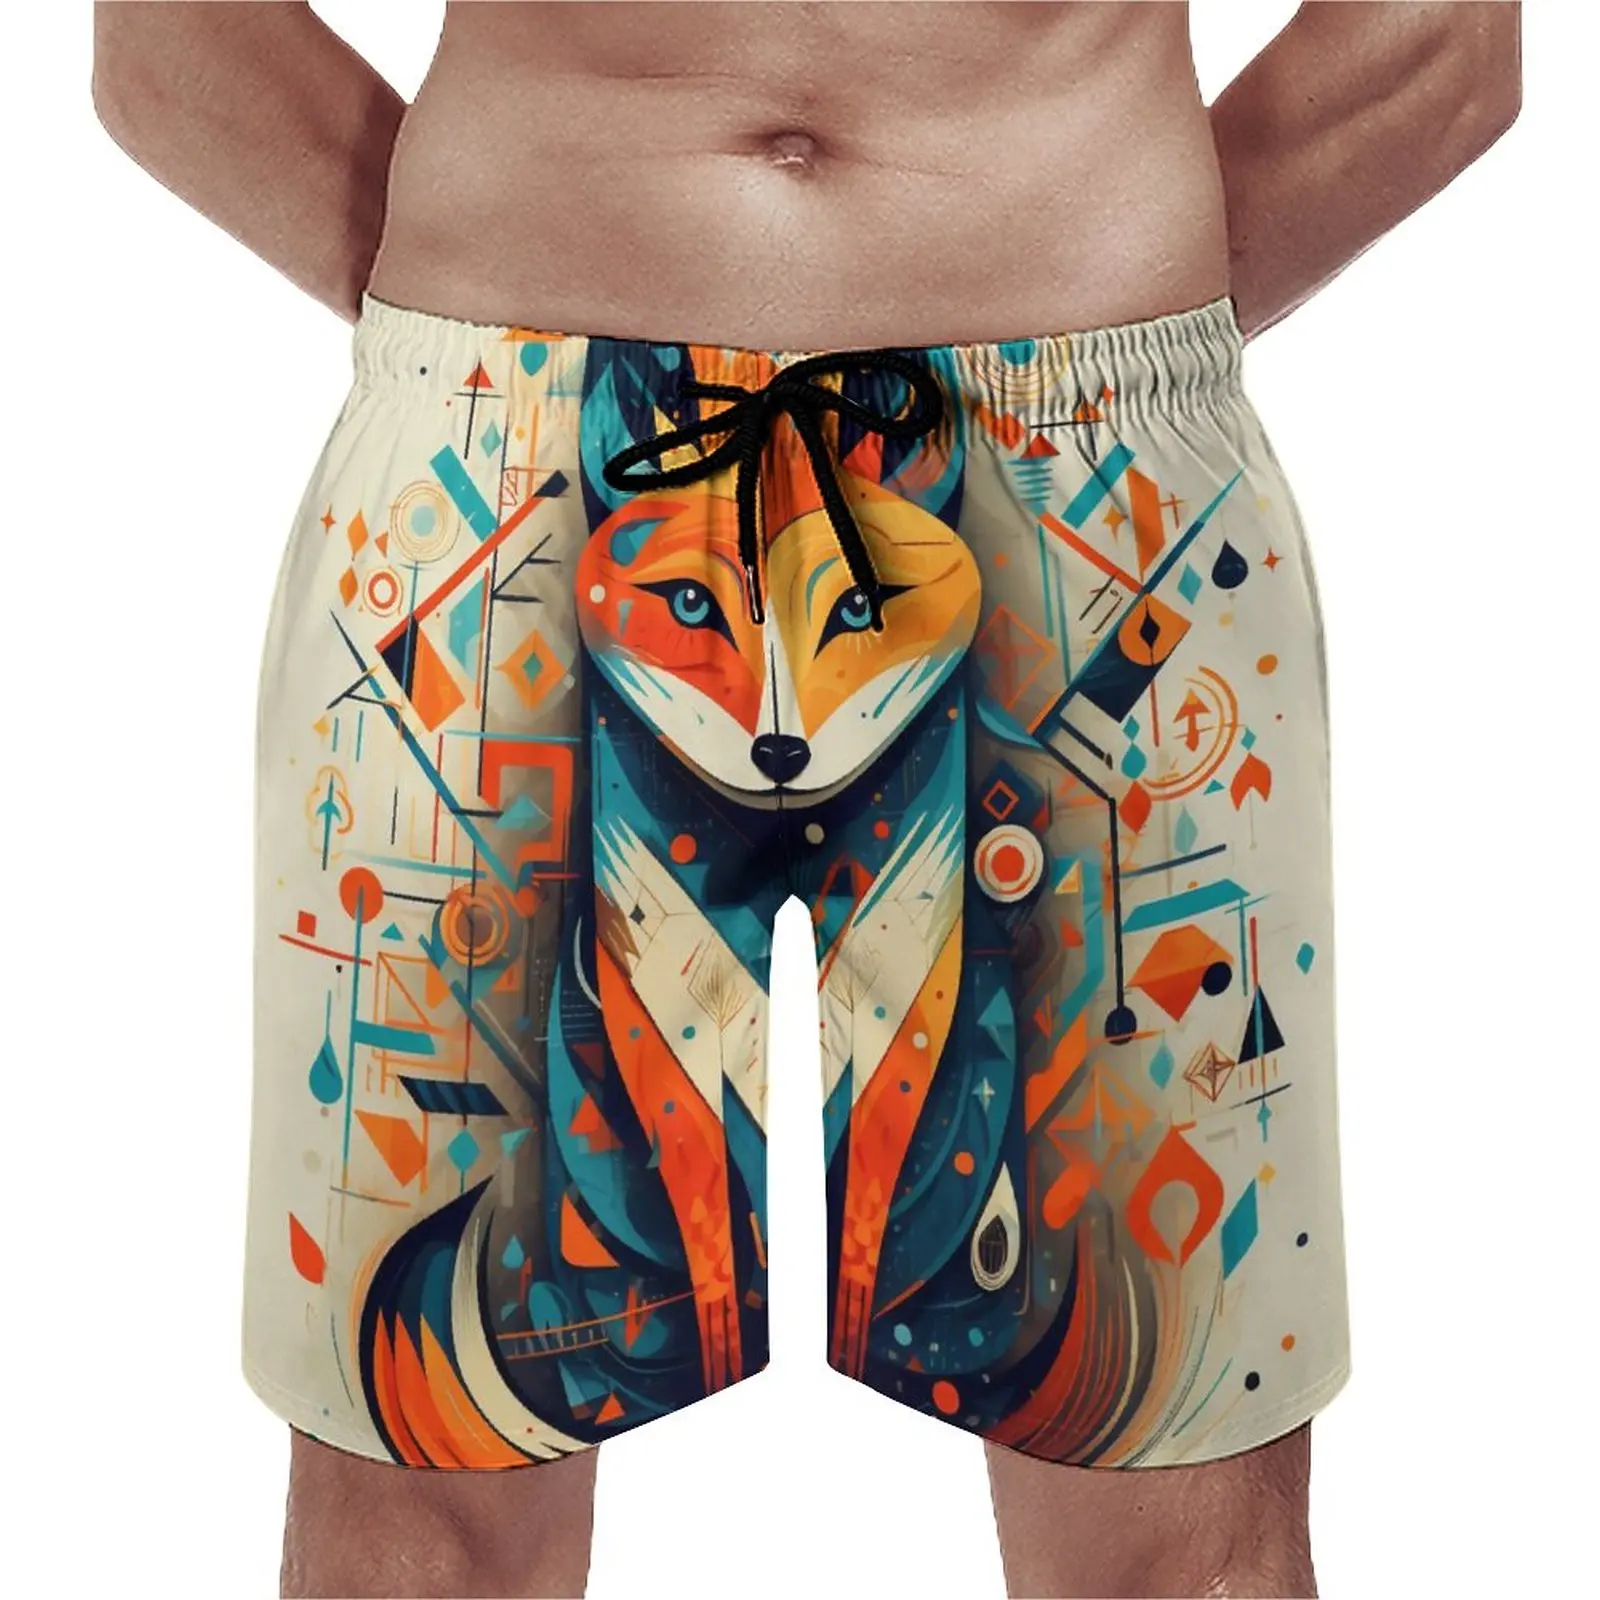 

Summer Board Shorts Fox Sports Surf Graffiti Line Art Fragmented Icons Beach Shorts Casual Quick Dry Swimming Trunks Plus Size